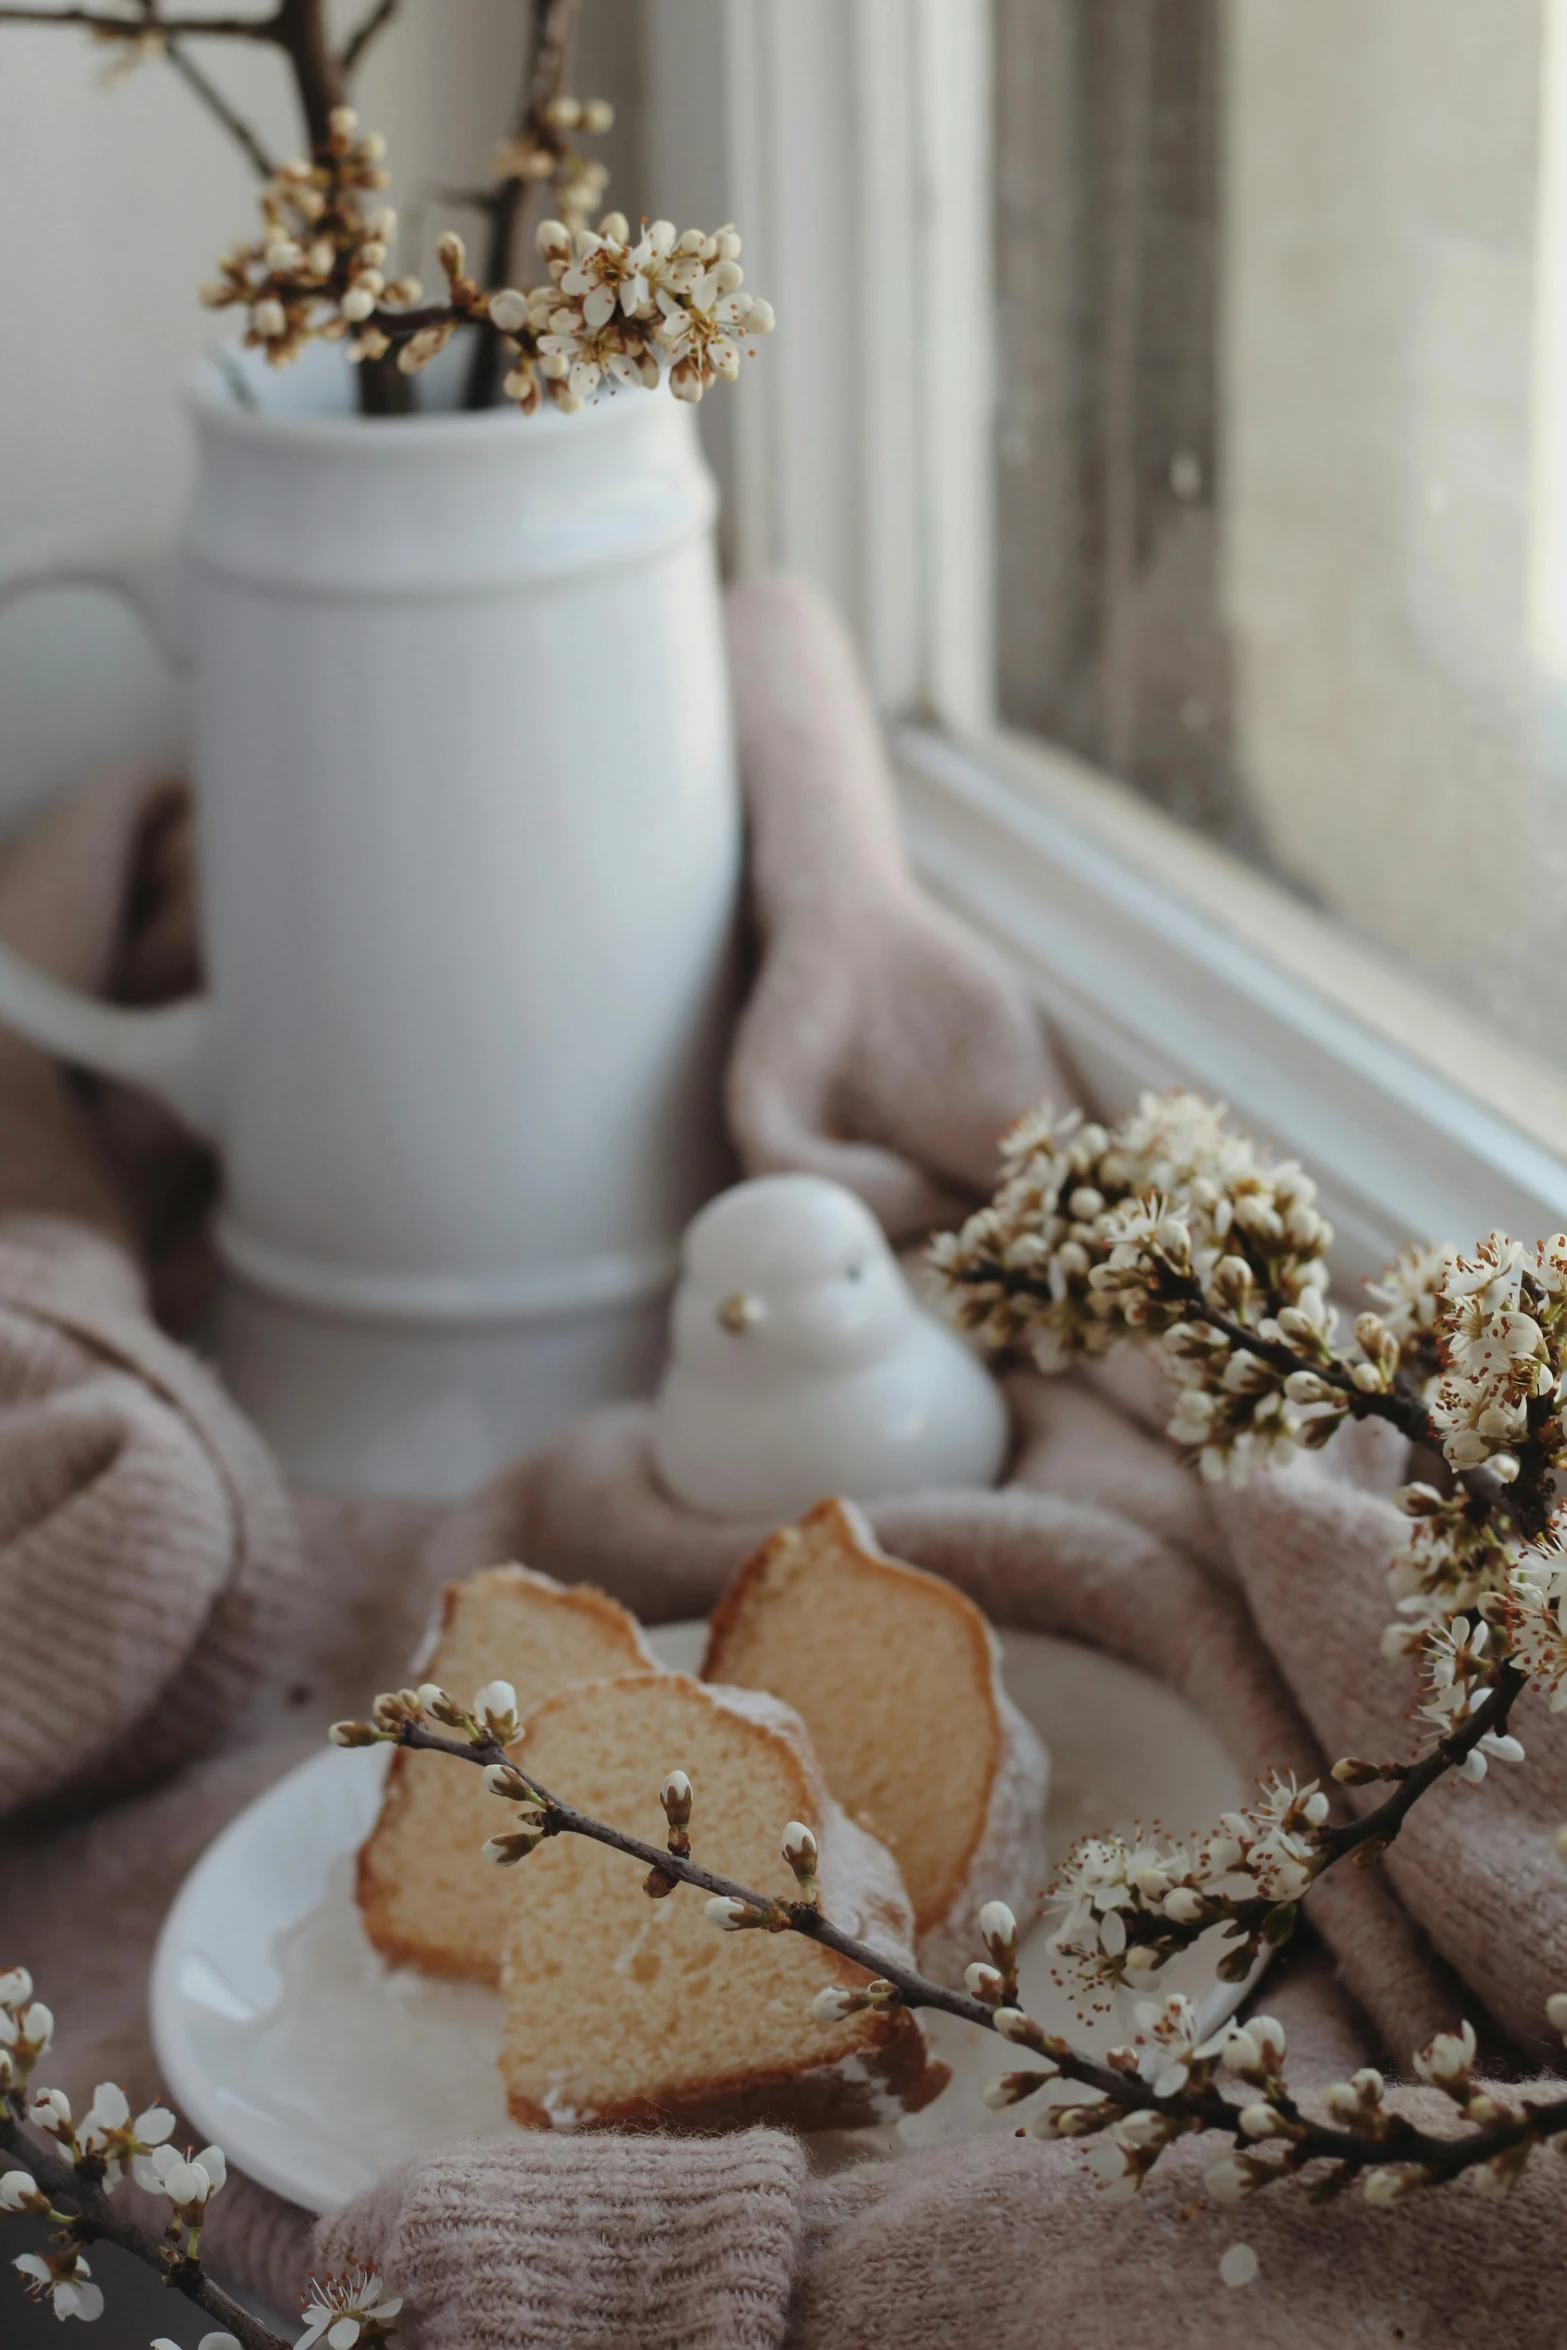 a close up of a plate of food near a window, a still life, by Lucia Peka, trending on pexels, romanticism, white blossoms, bakery, winter season, background image